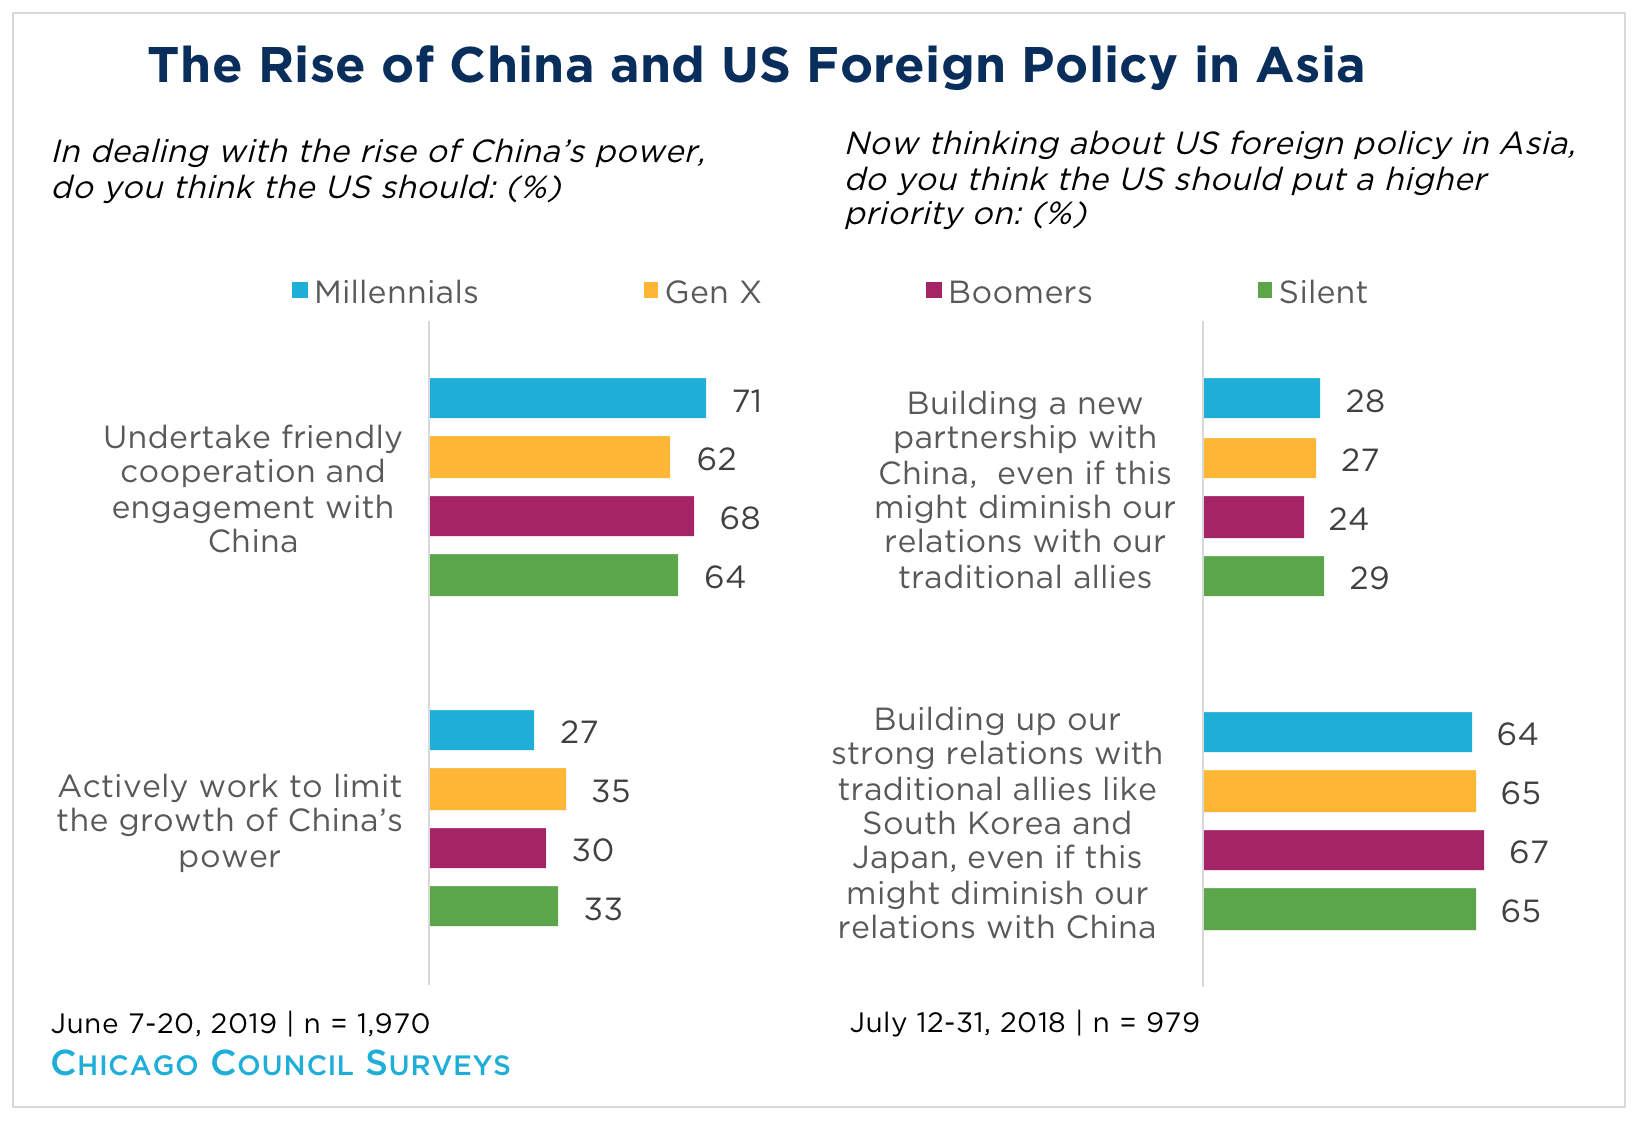 Bar graph showing the Rise of China and US Foreign Policy in Asia